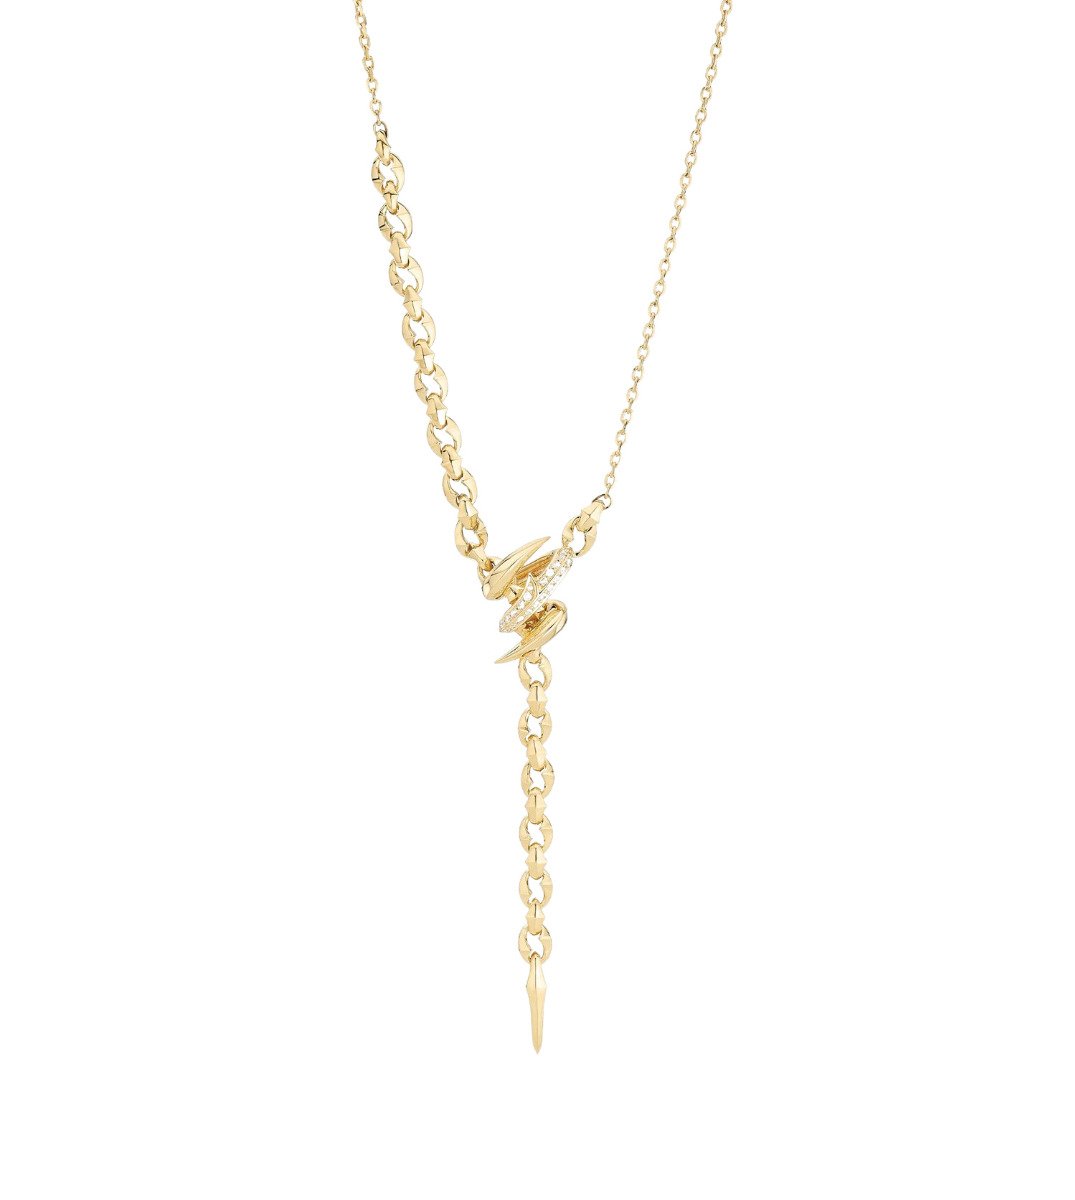 Stephen Webster "Thorn Embrace" Entwined Lariat Diamond Necklace